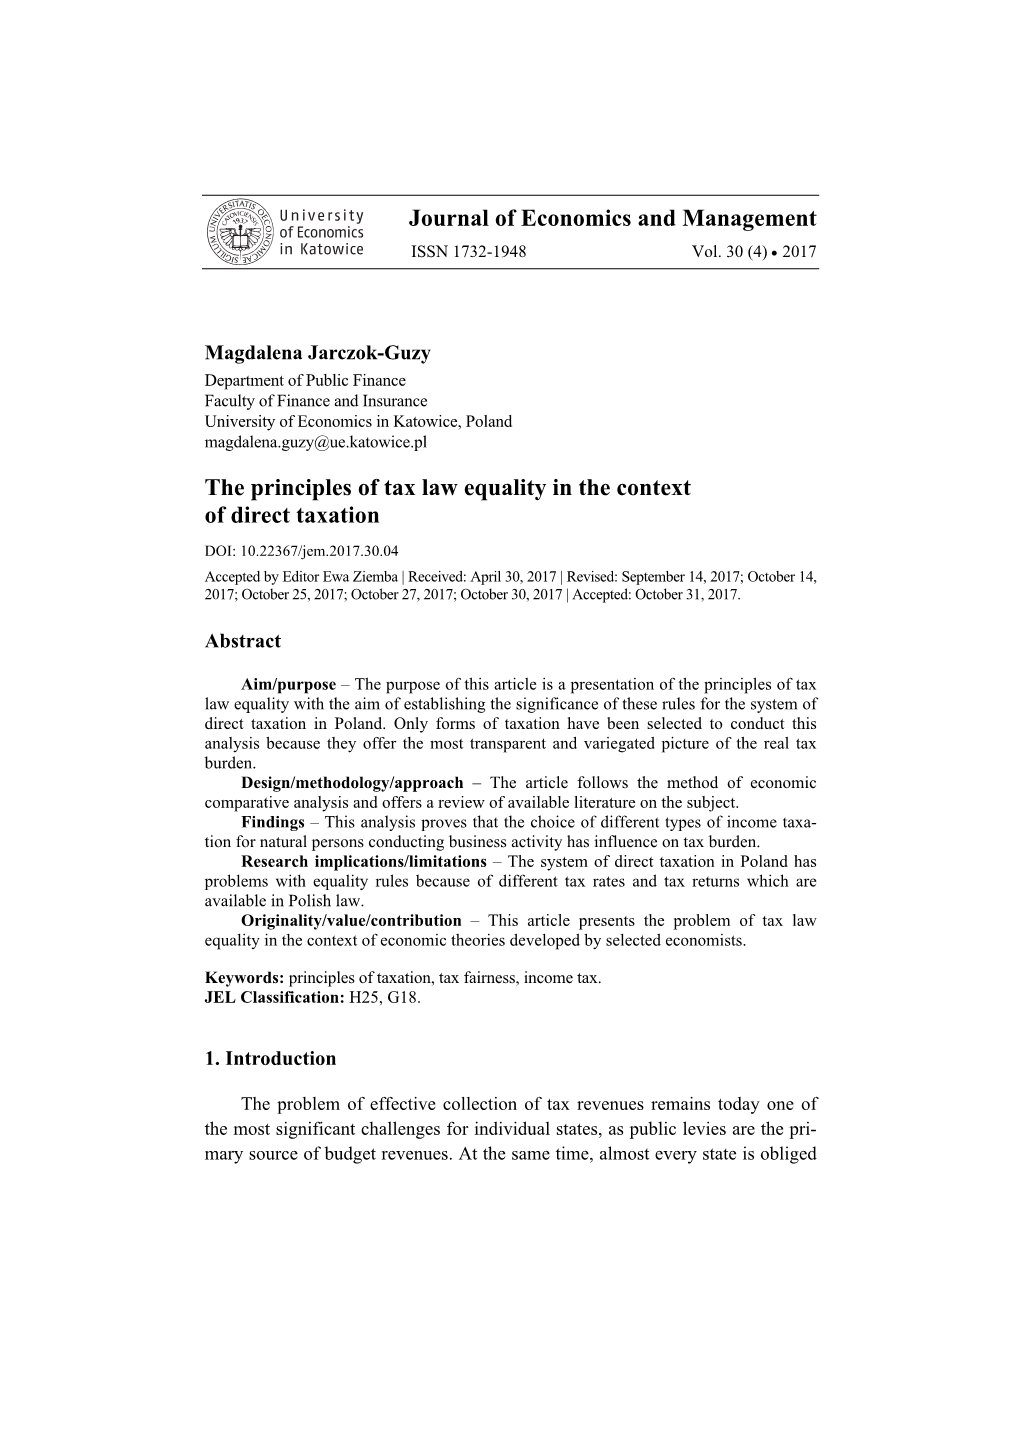 The Principles of Tax Law Equality in the Context of Direct Taxation